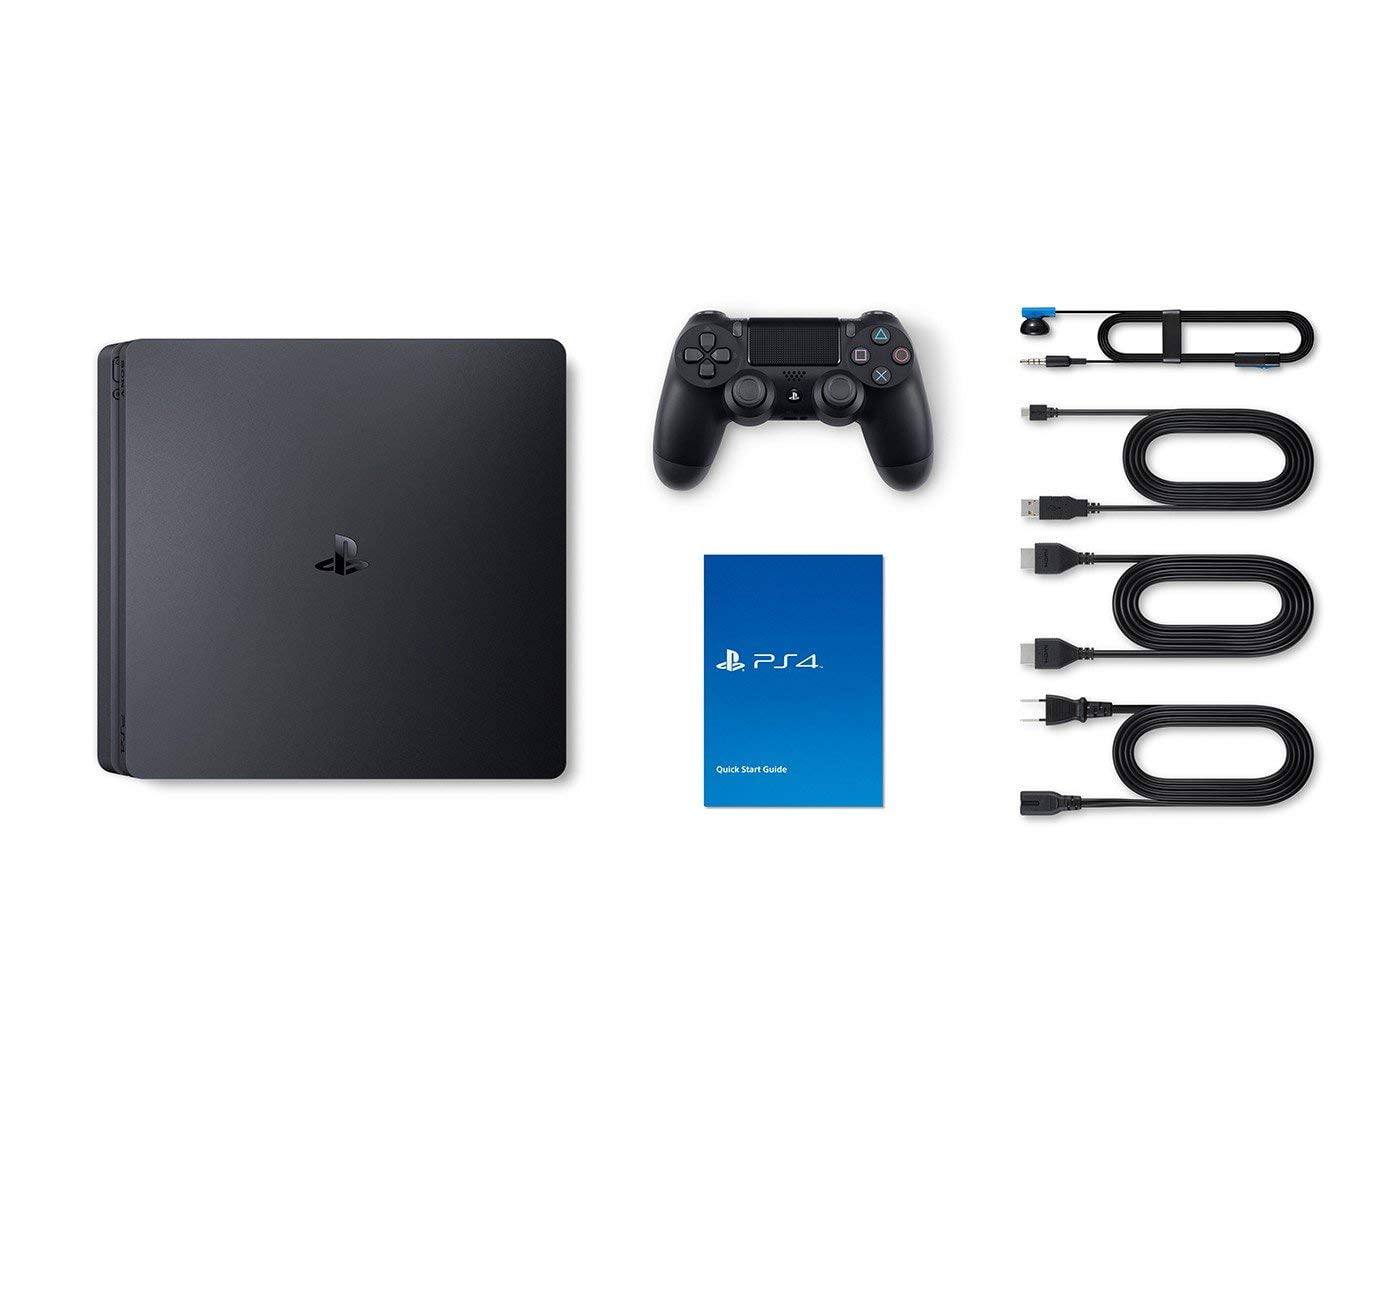 Holiday Bundle Sony PlayStation Slim 4 1TB PS4 Console with Game: Marvel's Spider-Man: Game of The Year Edition - Express Available - Walmart.com